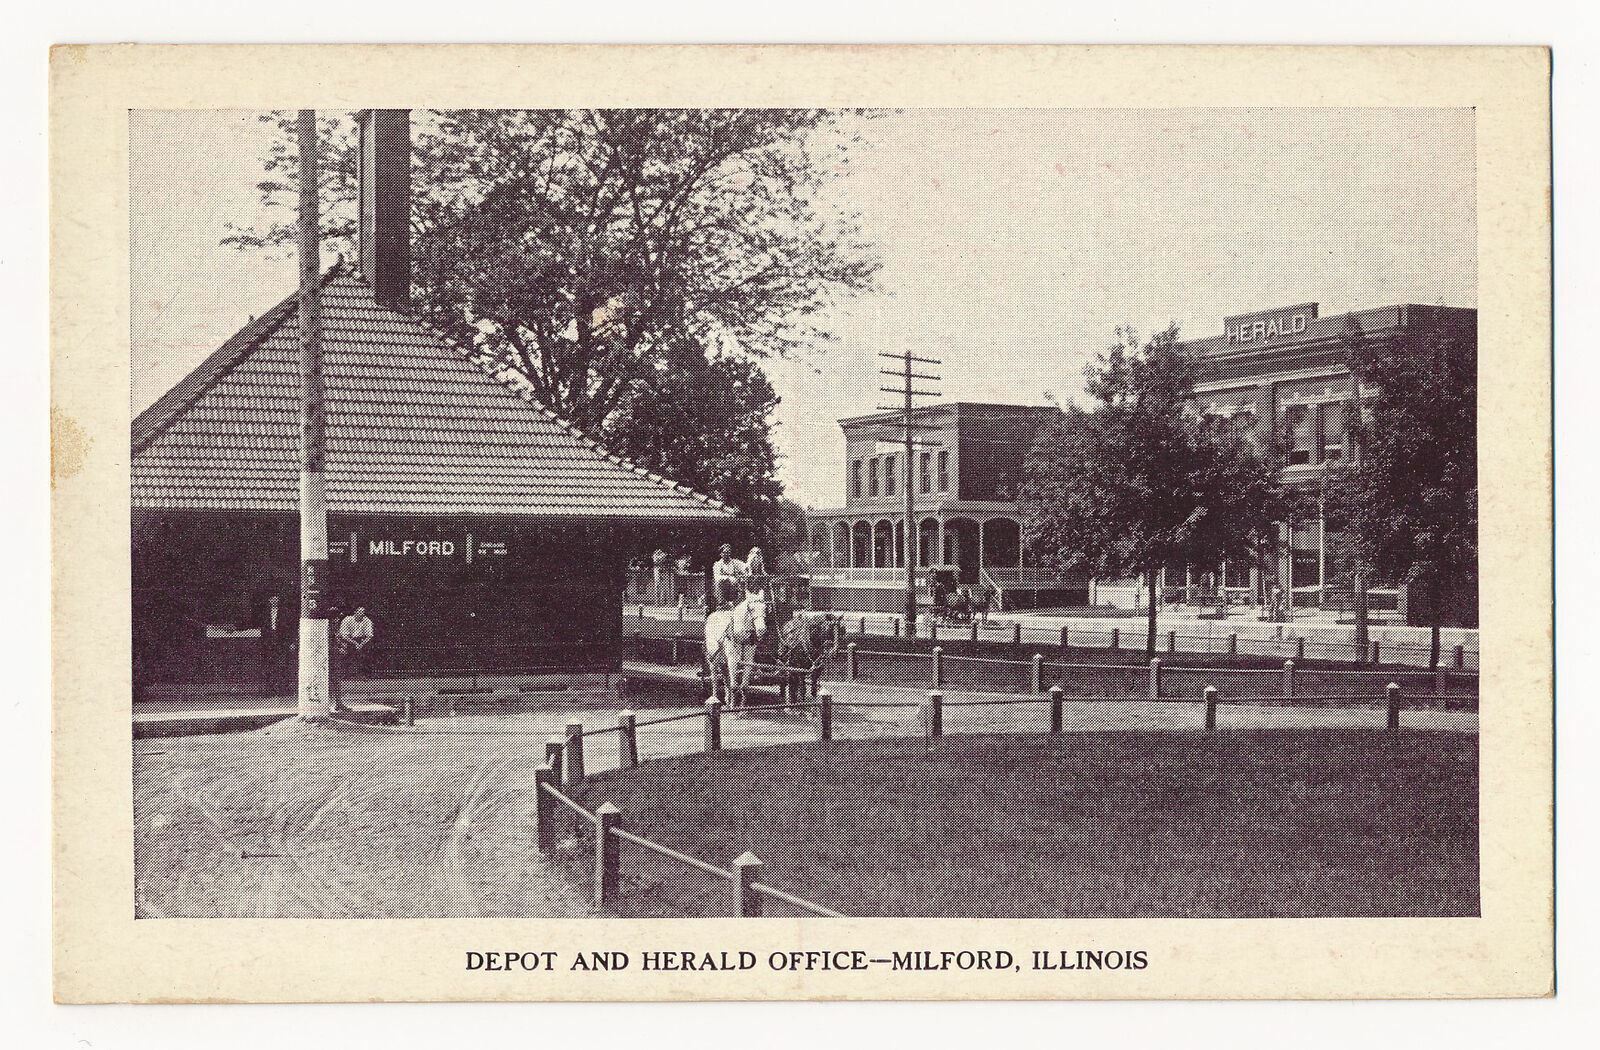 Railroad Depot and Herald Office, Milford, Illinois ca.1910